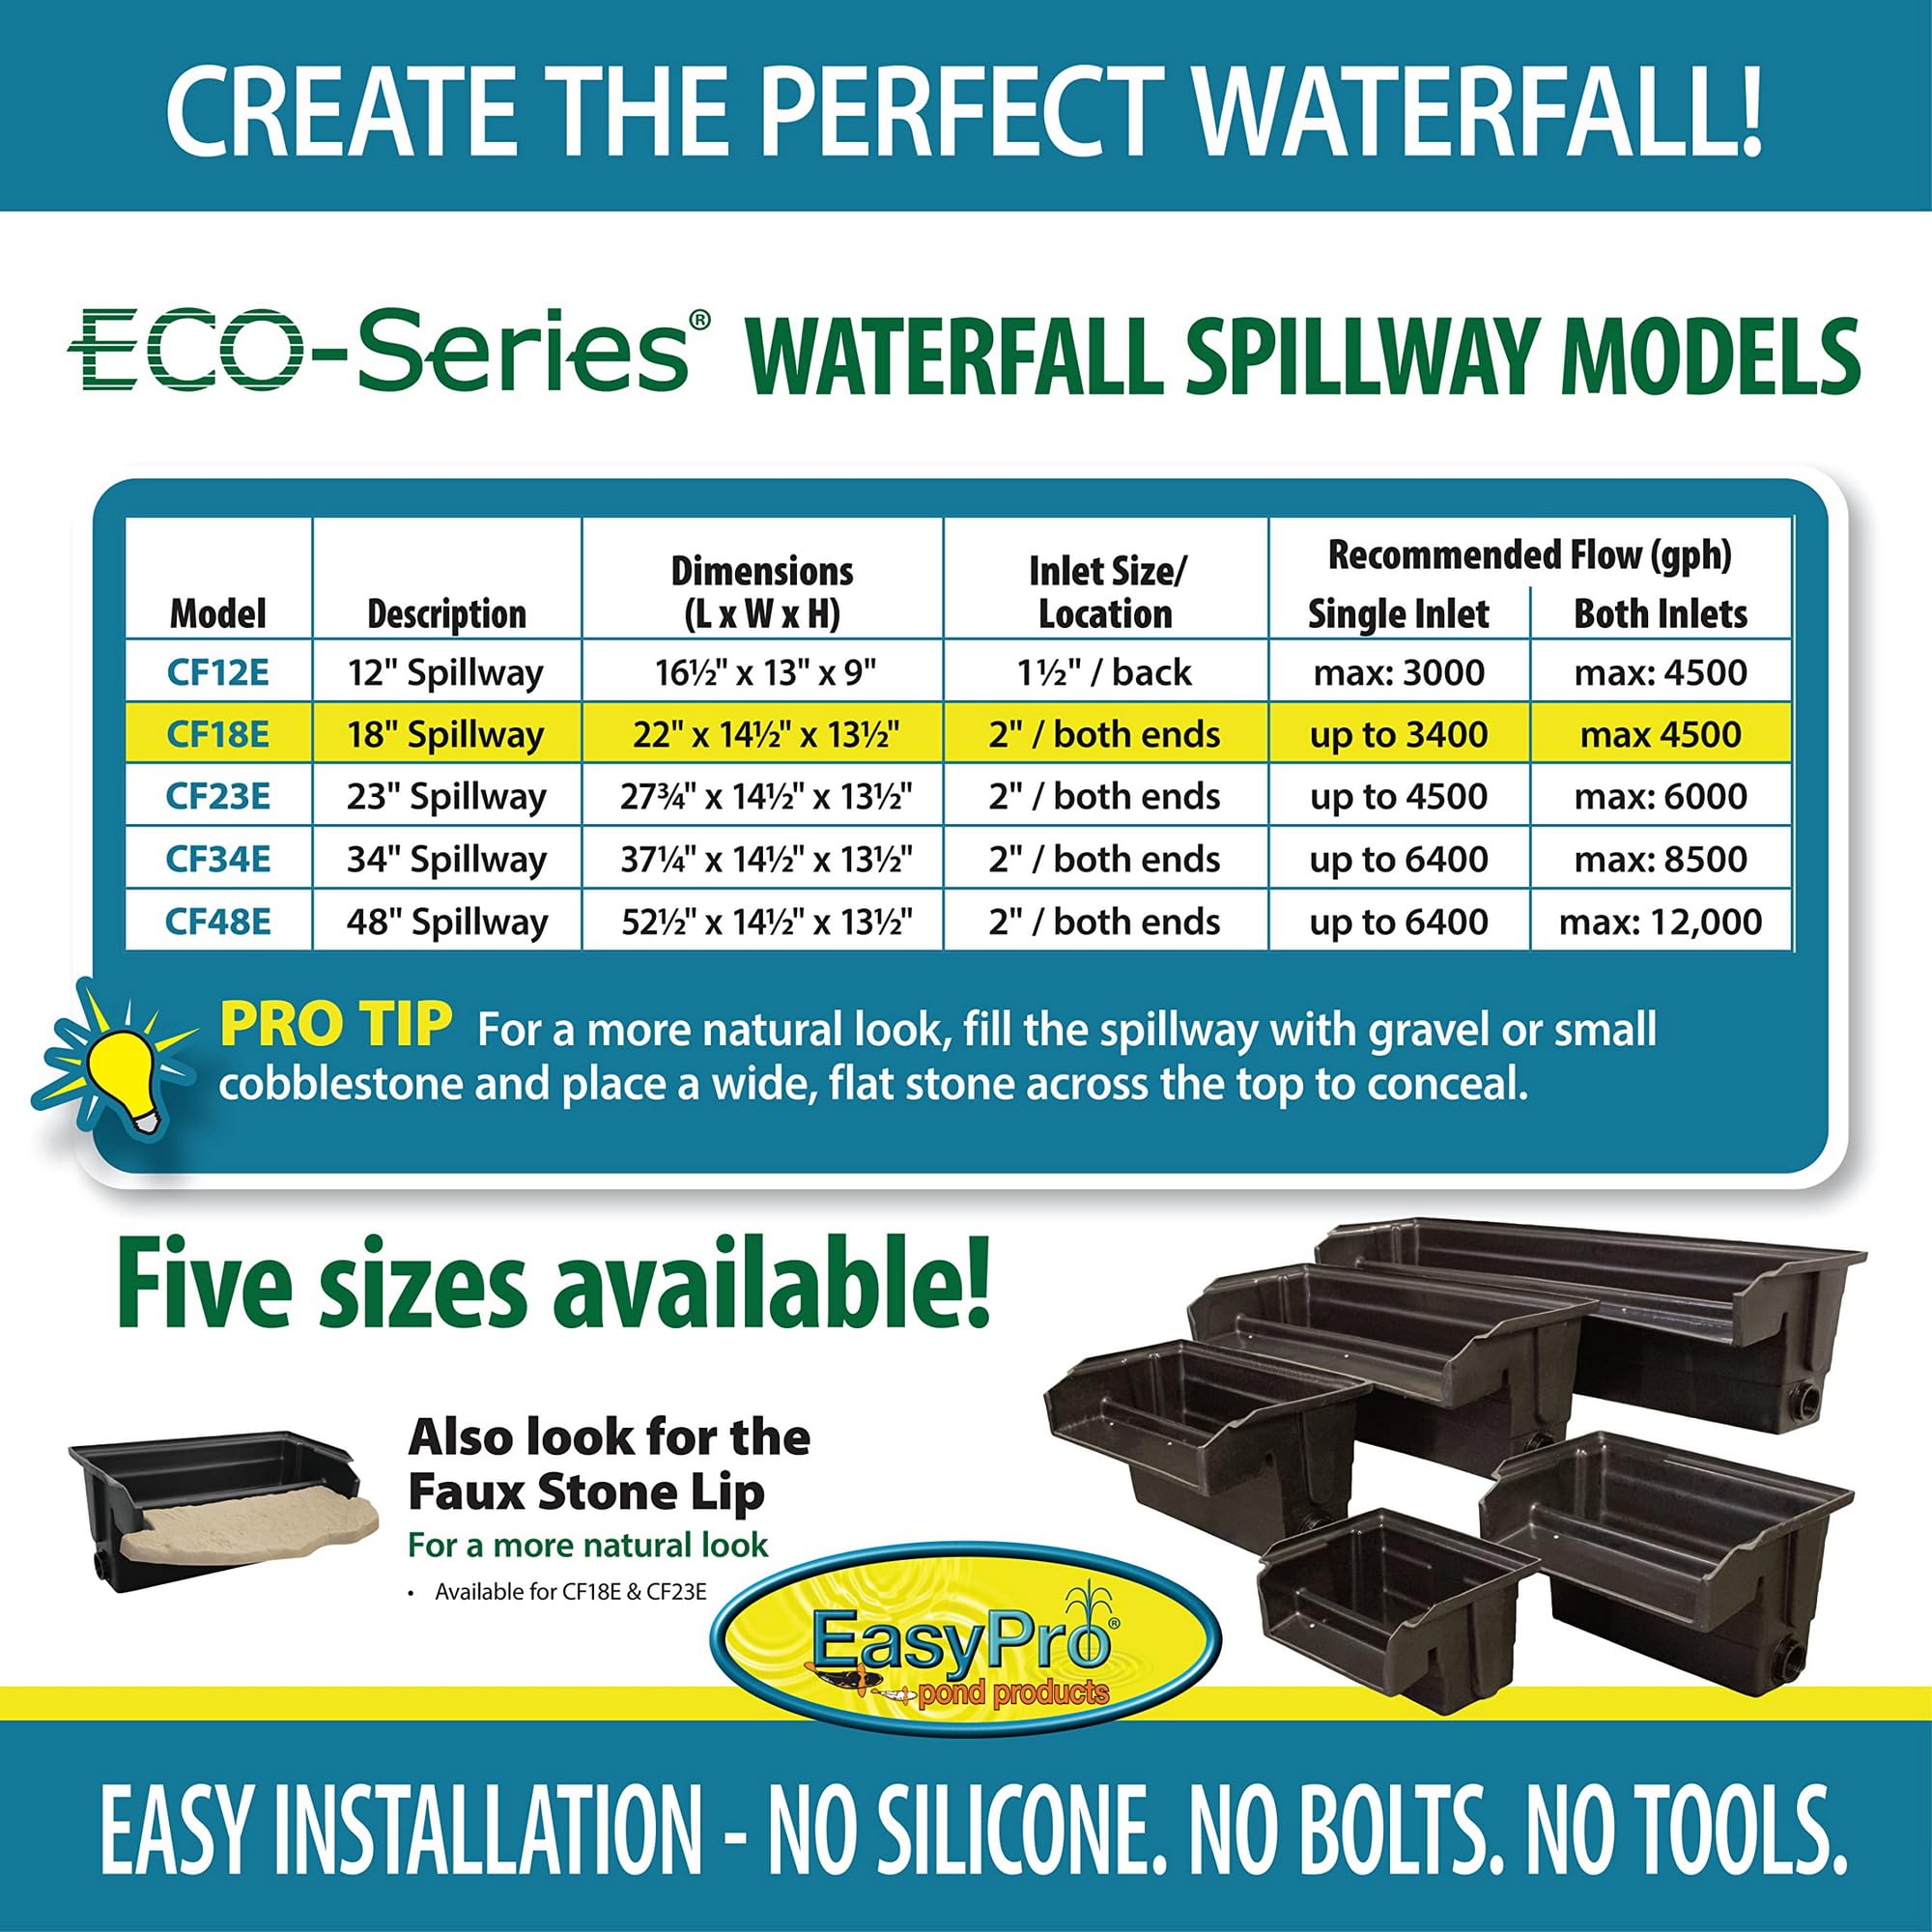 EasyPro Pond Products CF18E Eco-Series 18” Waterfall Spillway is Ideal for Just-A-Falls Water Features. Connect Liner Without Tools. 2-2” Installed Spinweld Inlets. Up to 3400 to 4500 GPH Flow